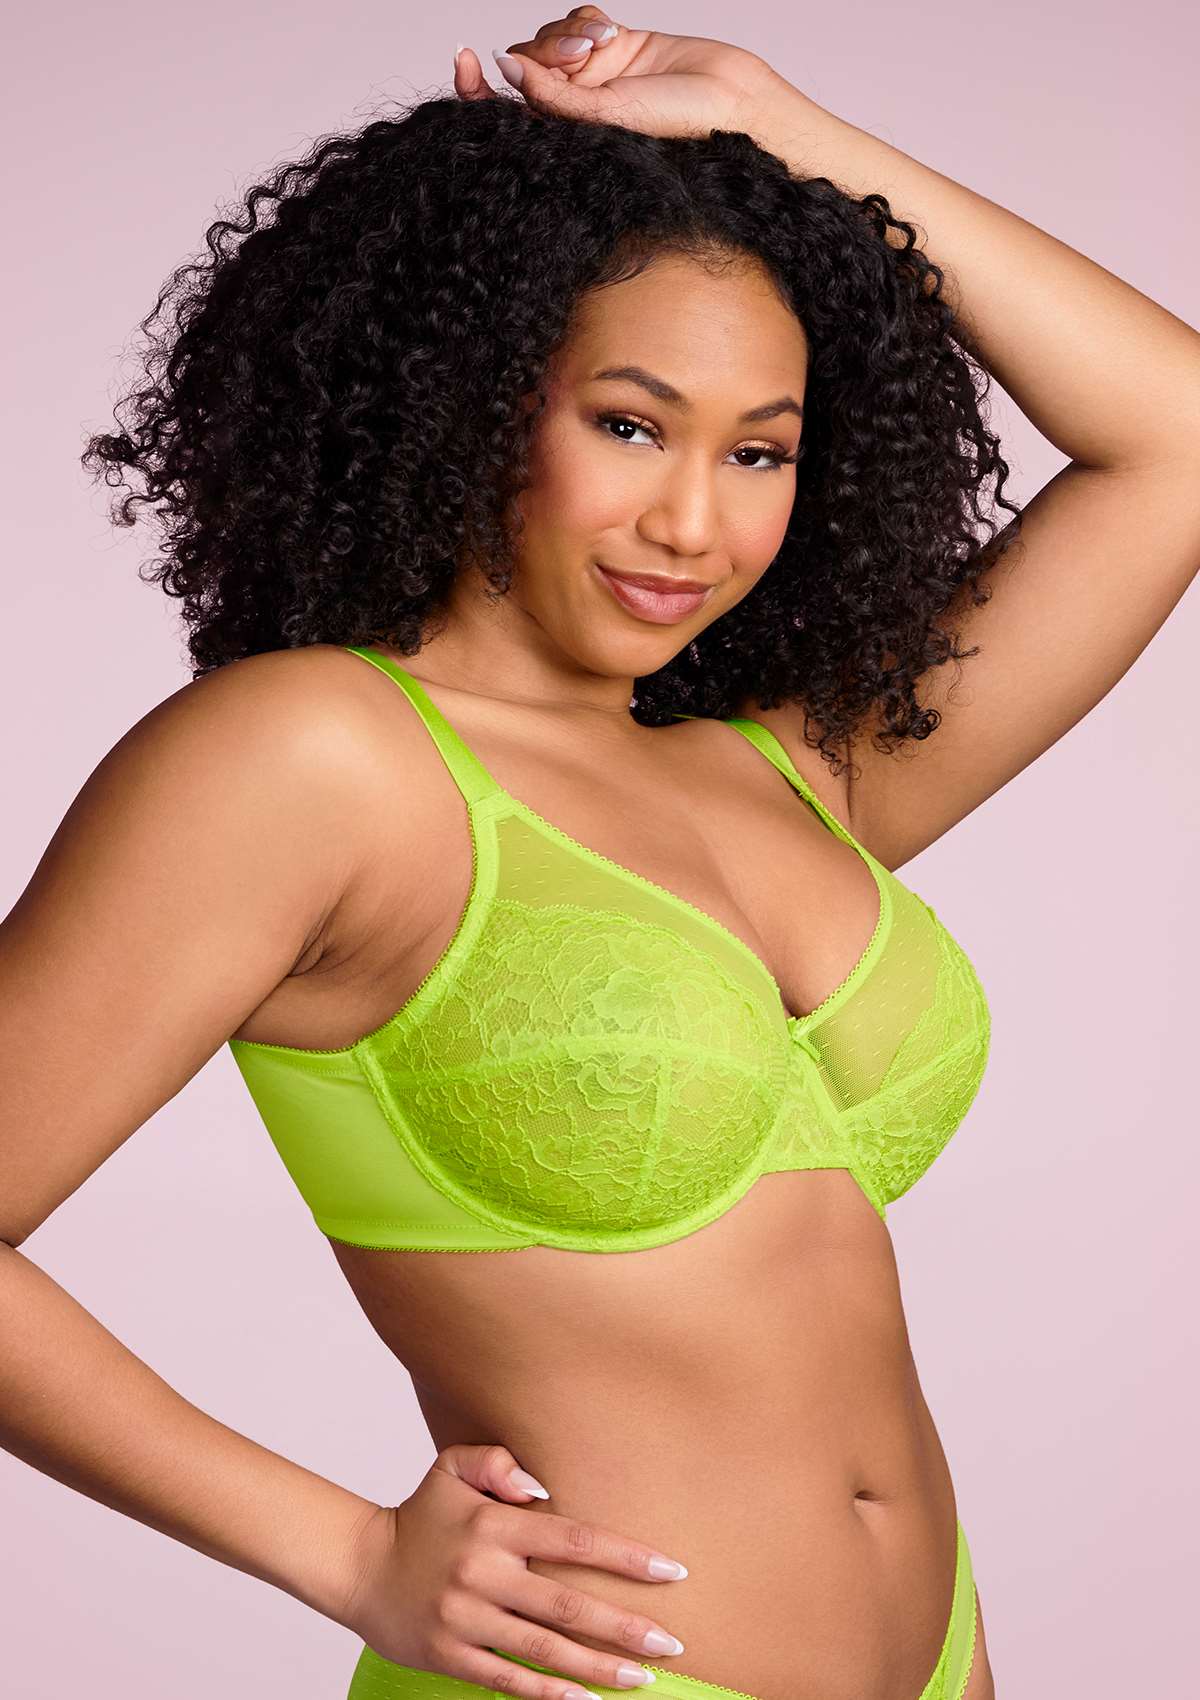 HSIA Enchante Full Cup Minimizing Bra: Supportive Unlined Lace Bra - Lime Green / 38 / DDD/F